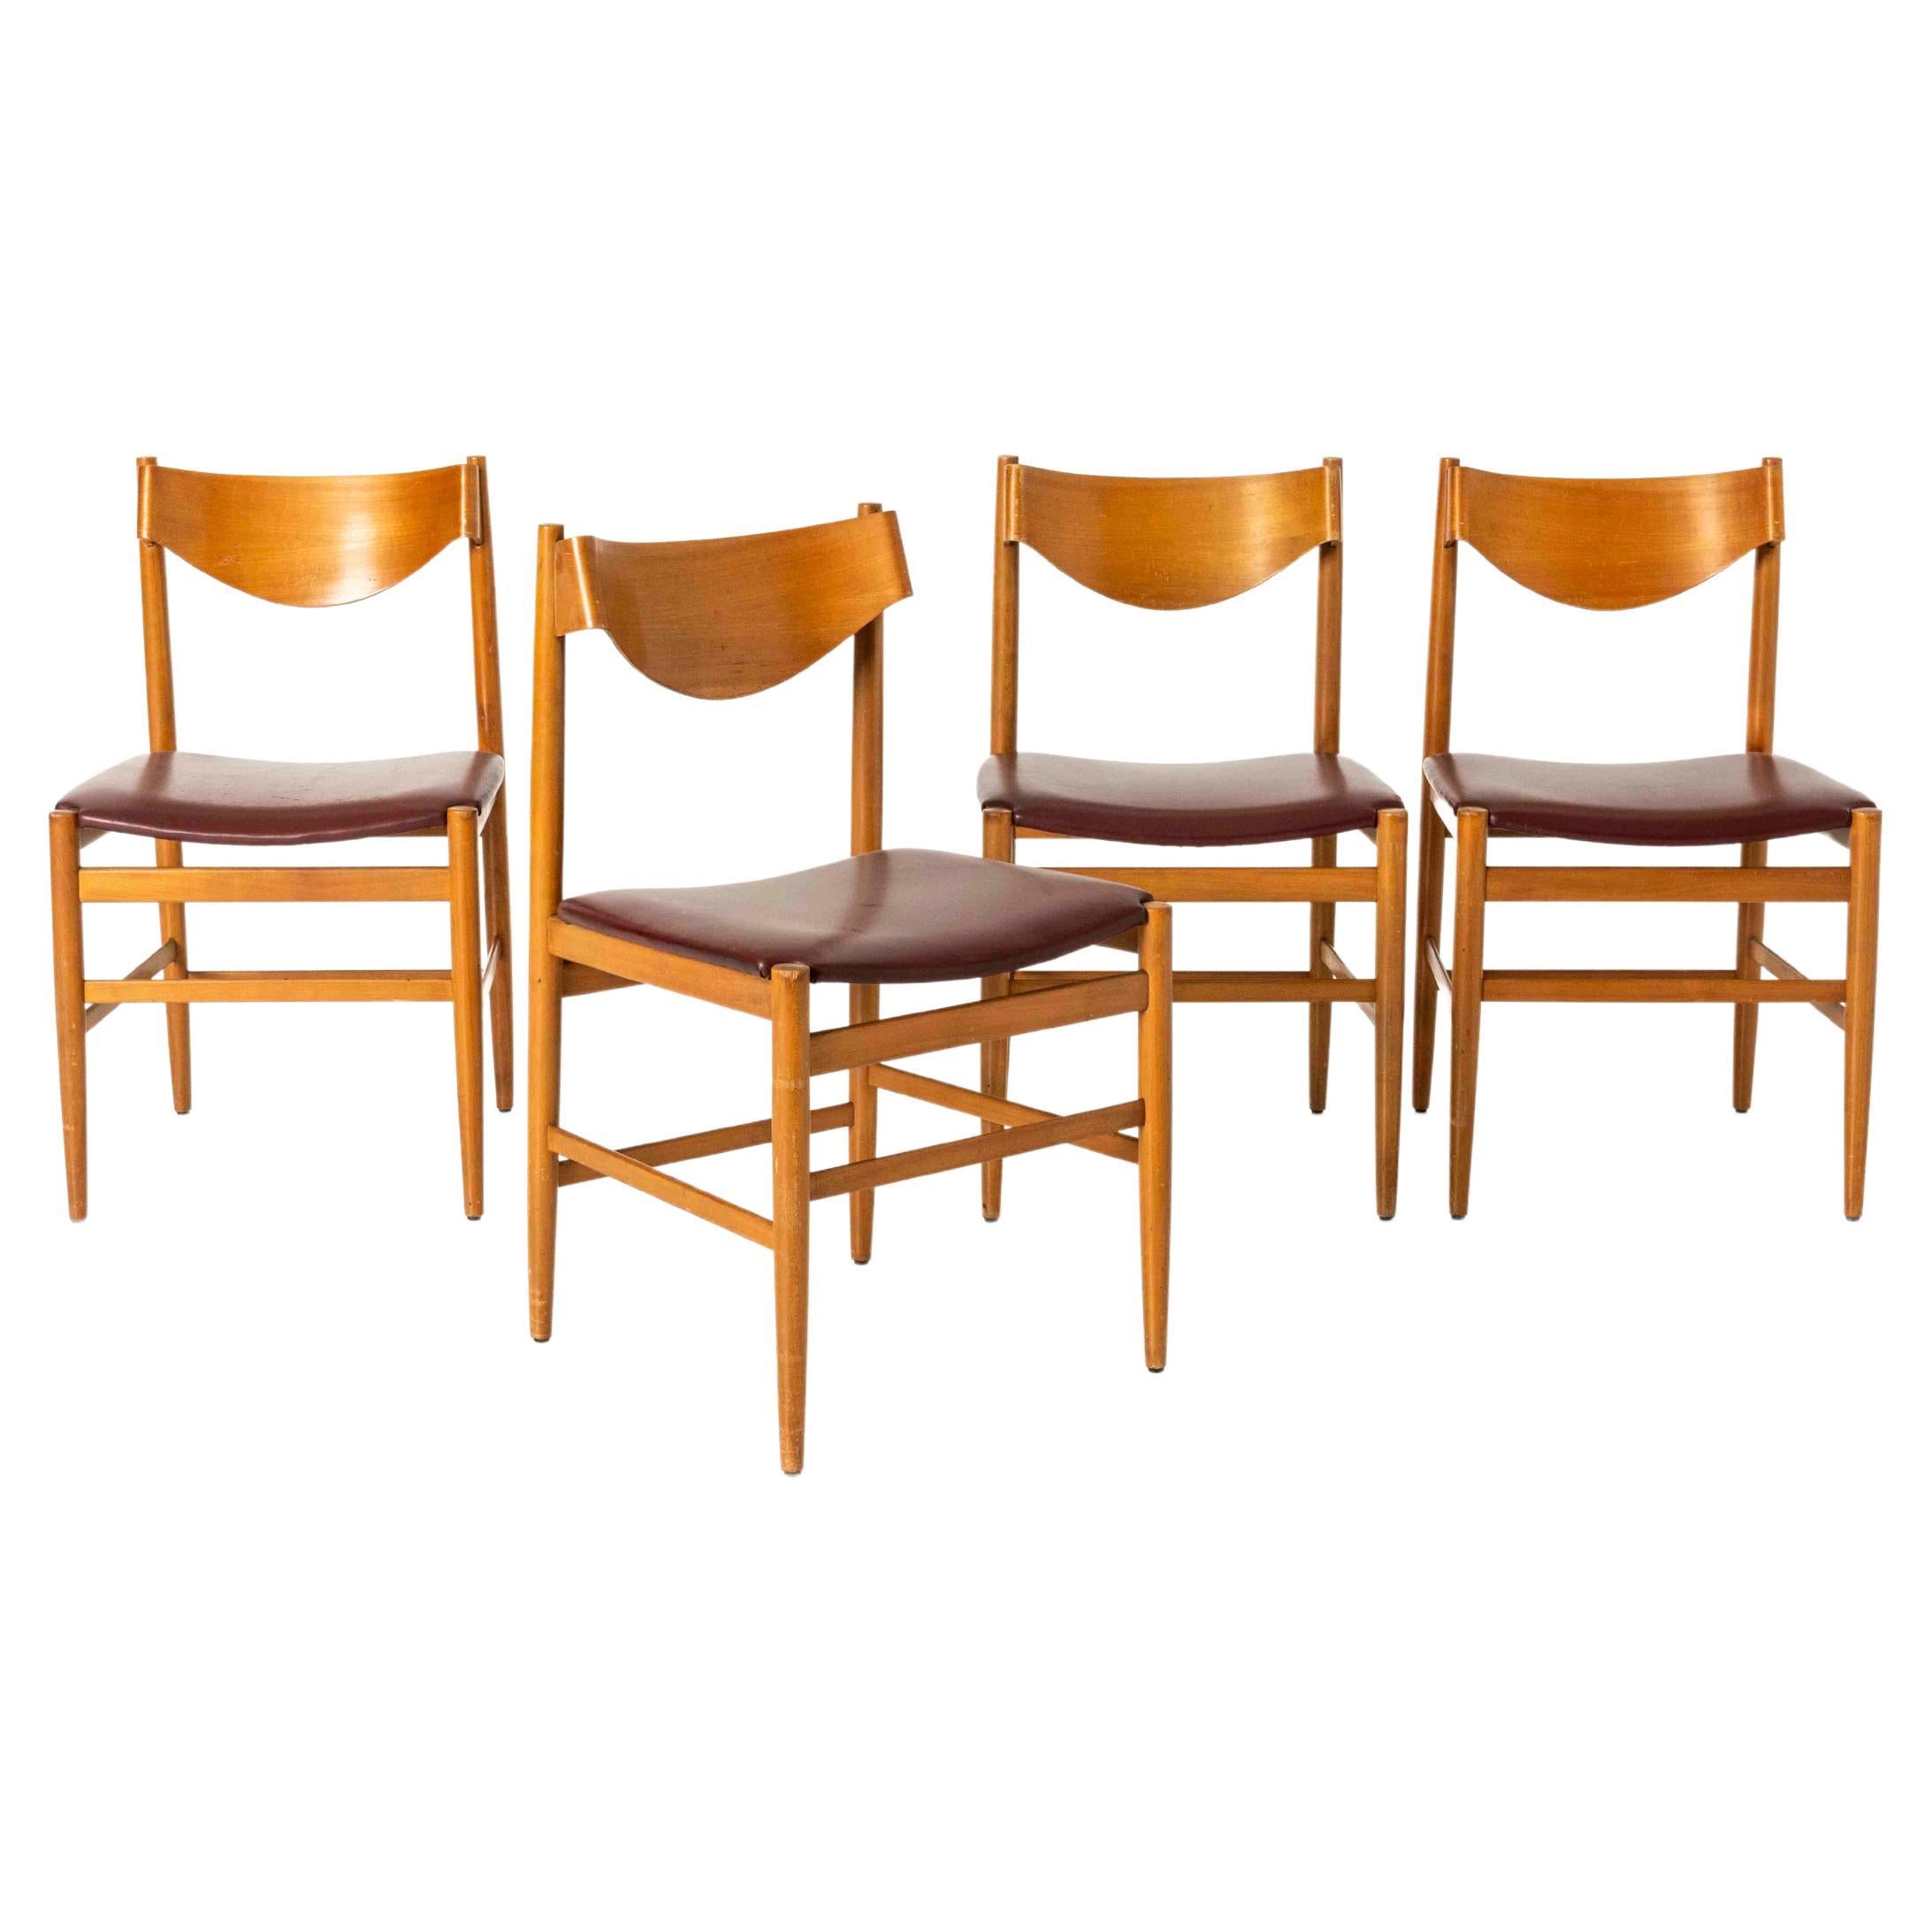 Set of Four Dining Chairs by Gianfranco Frattini for Cassina, 1960s